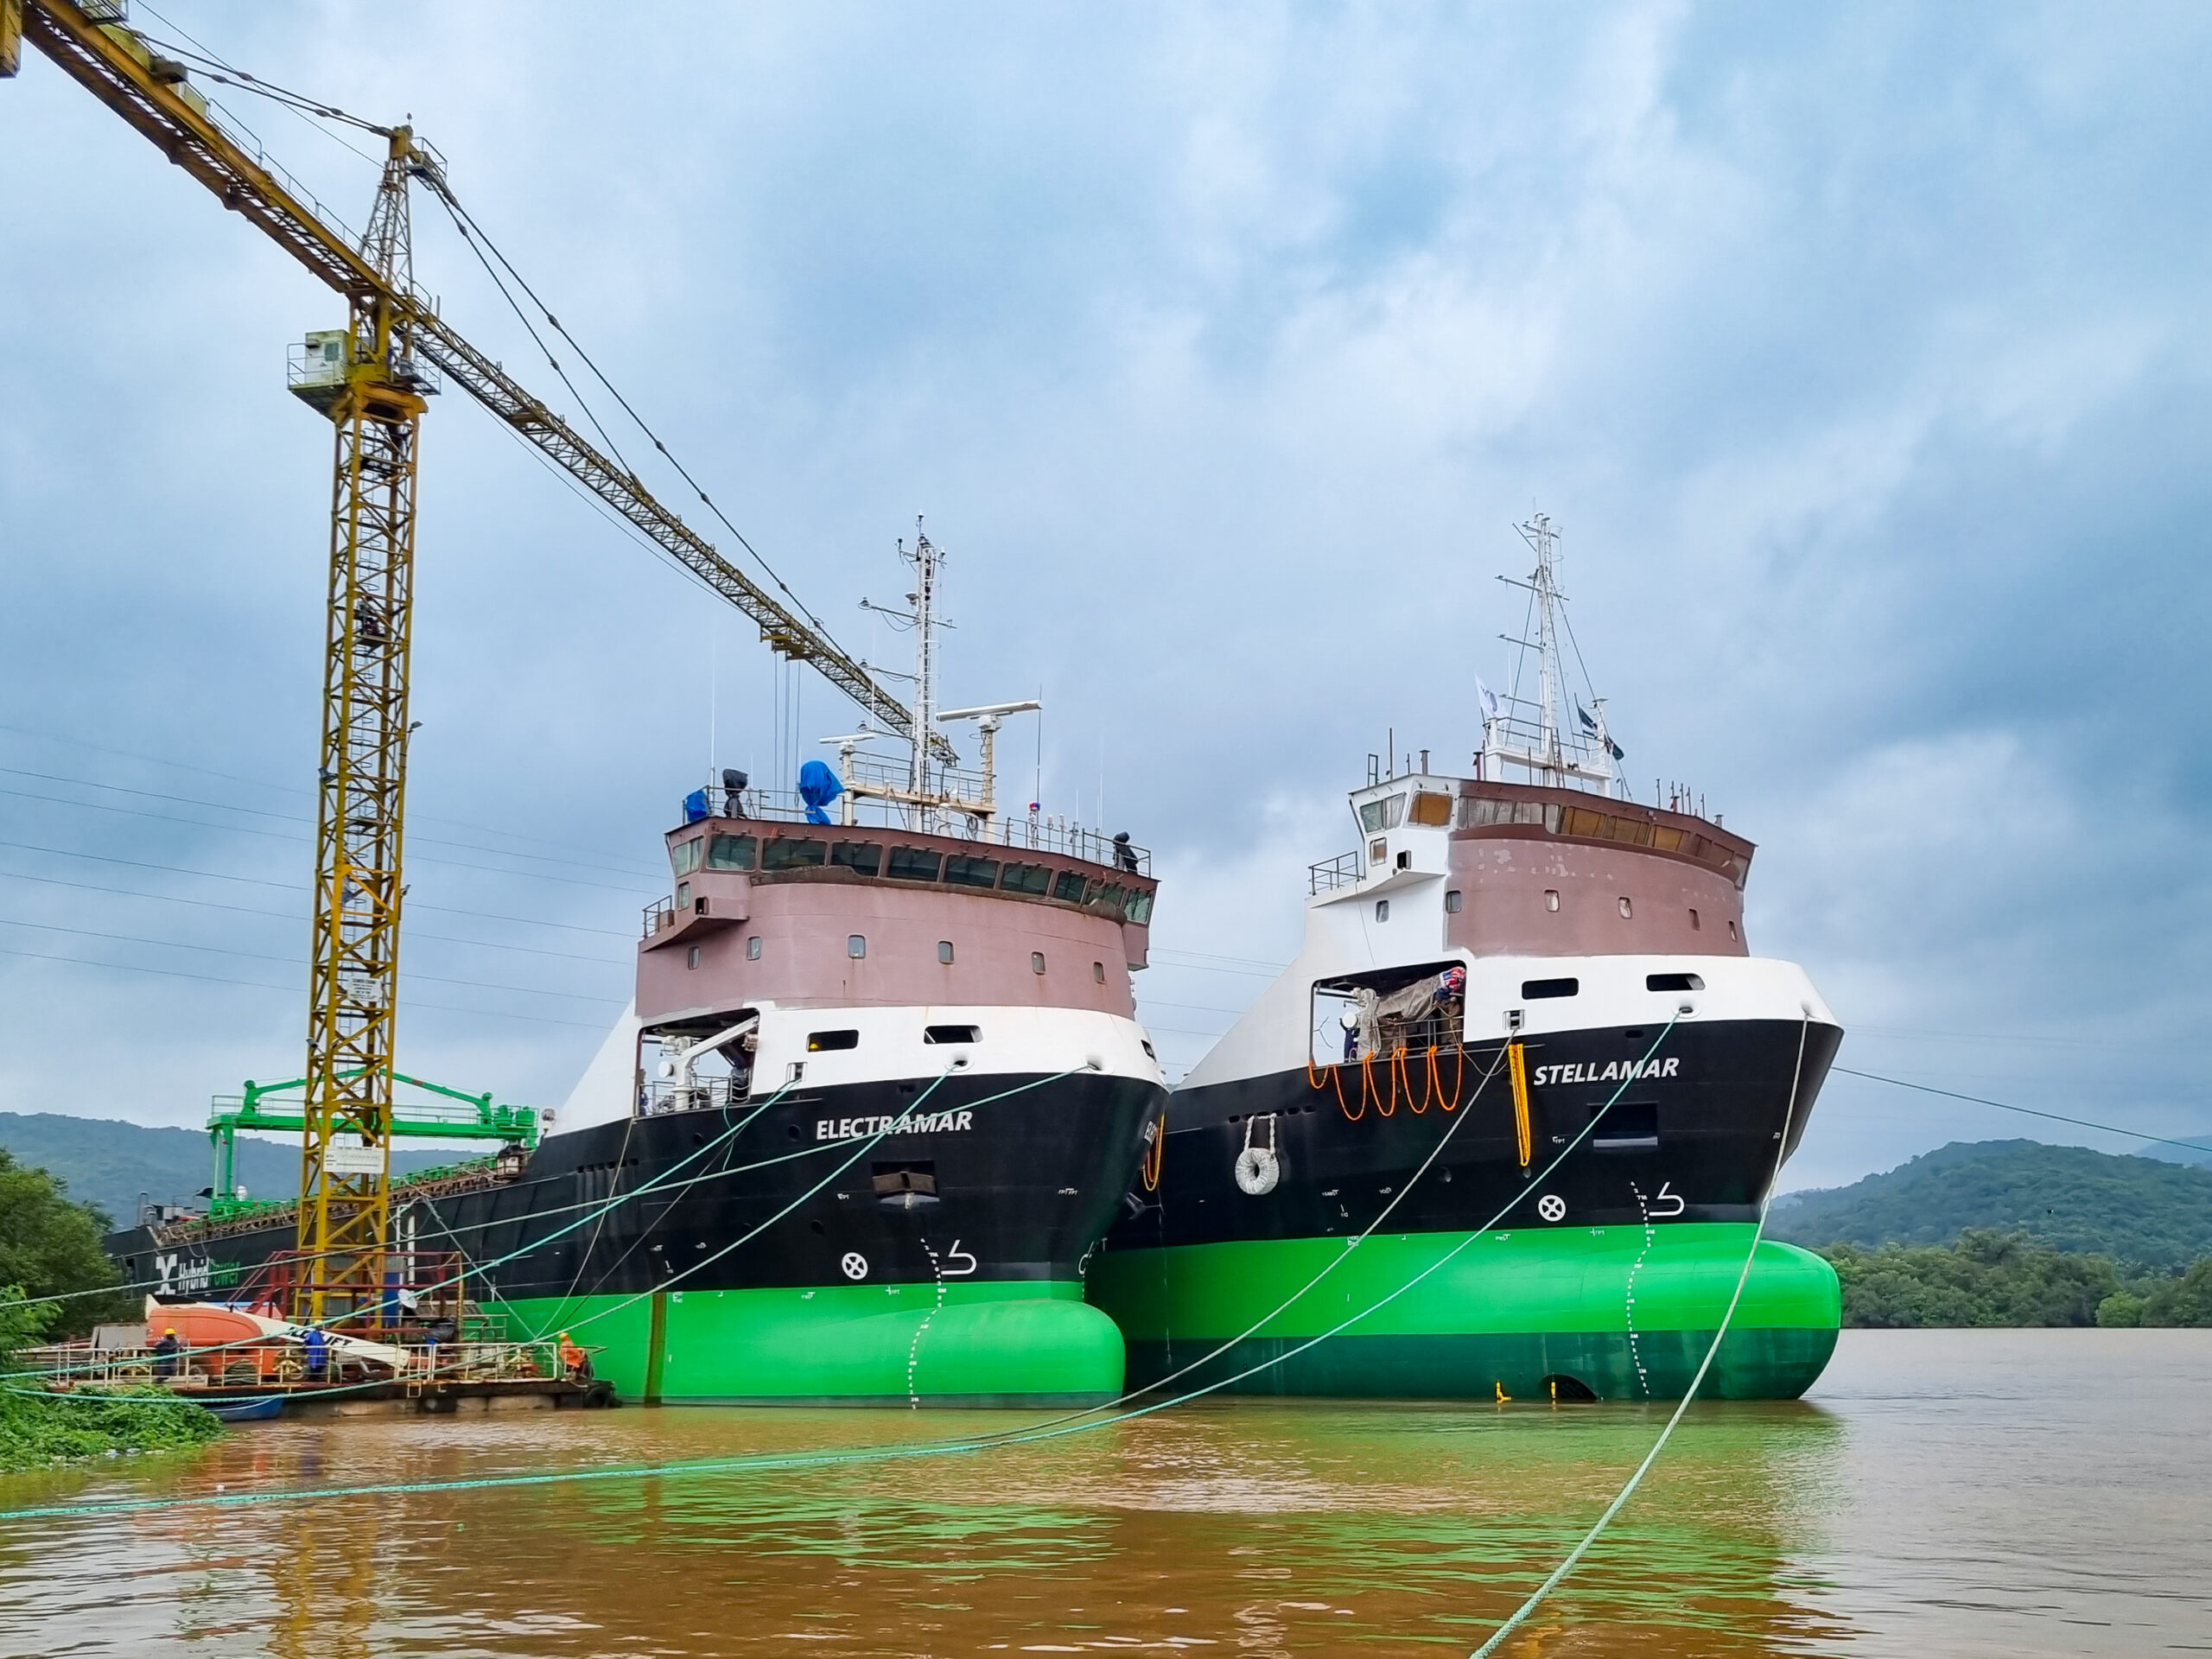 Pension fund invests in Aspo’s ESL Shipping Green Transition